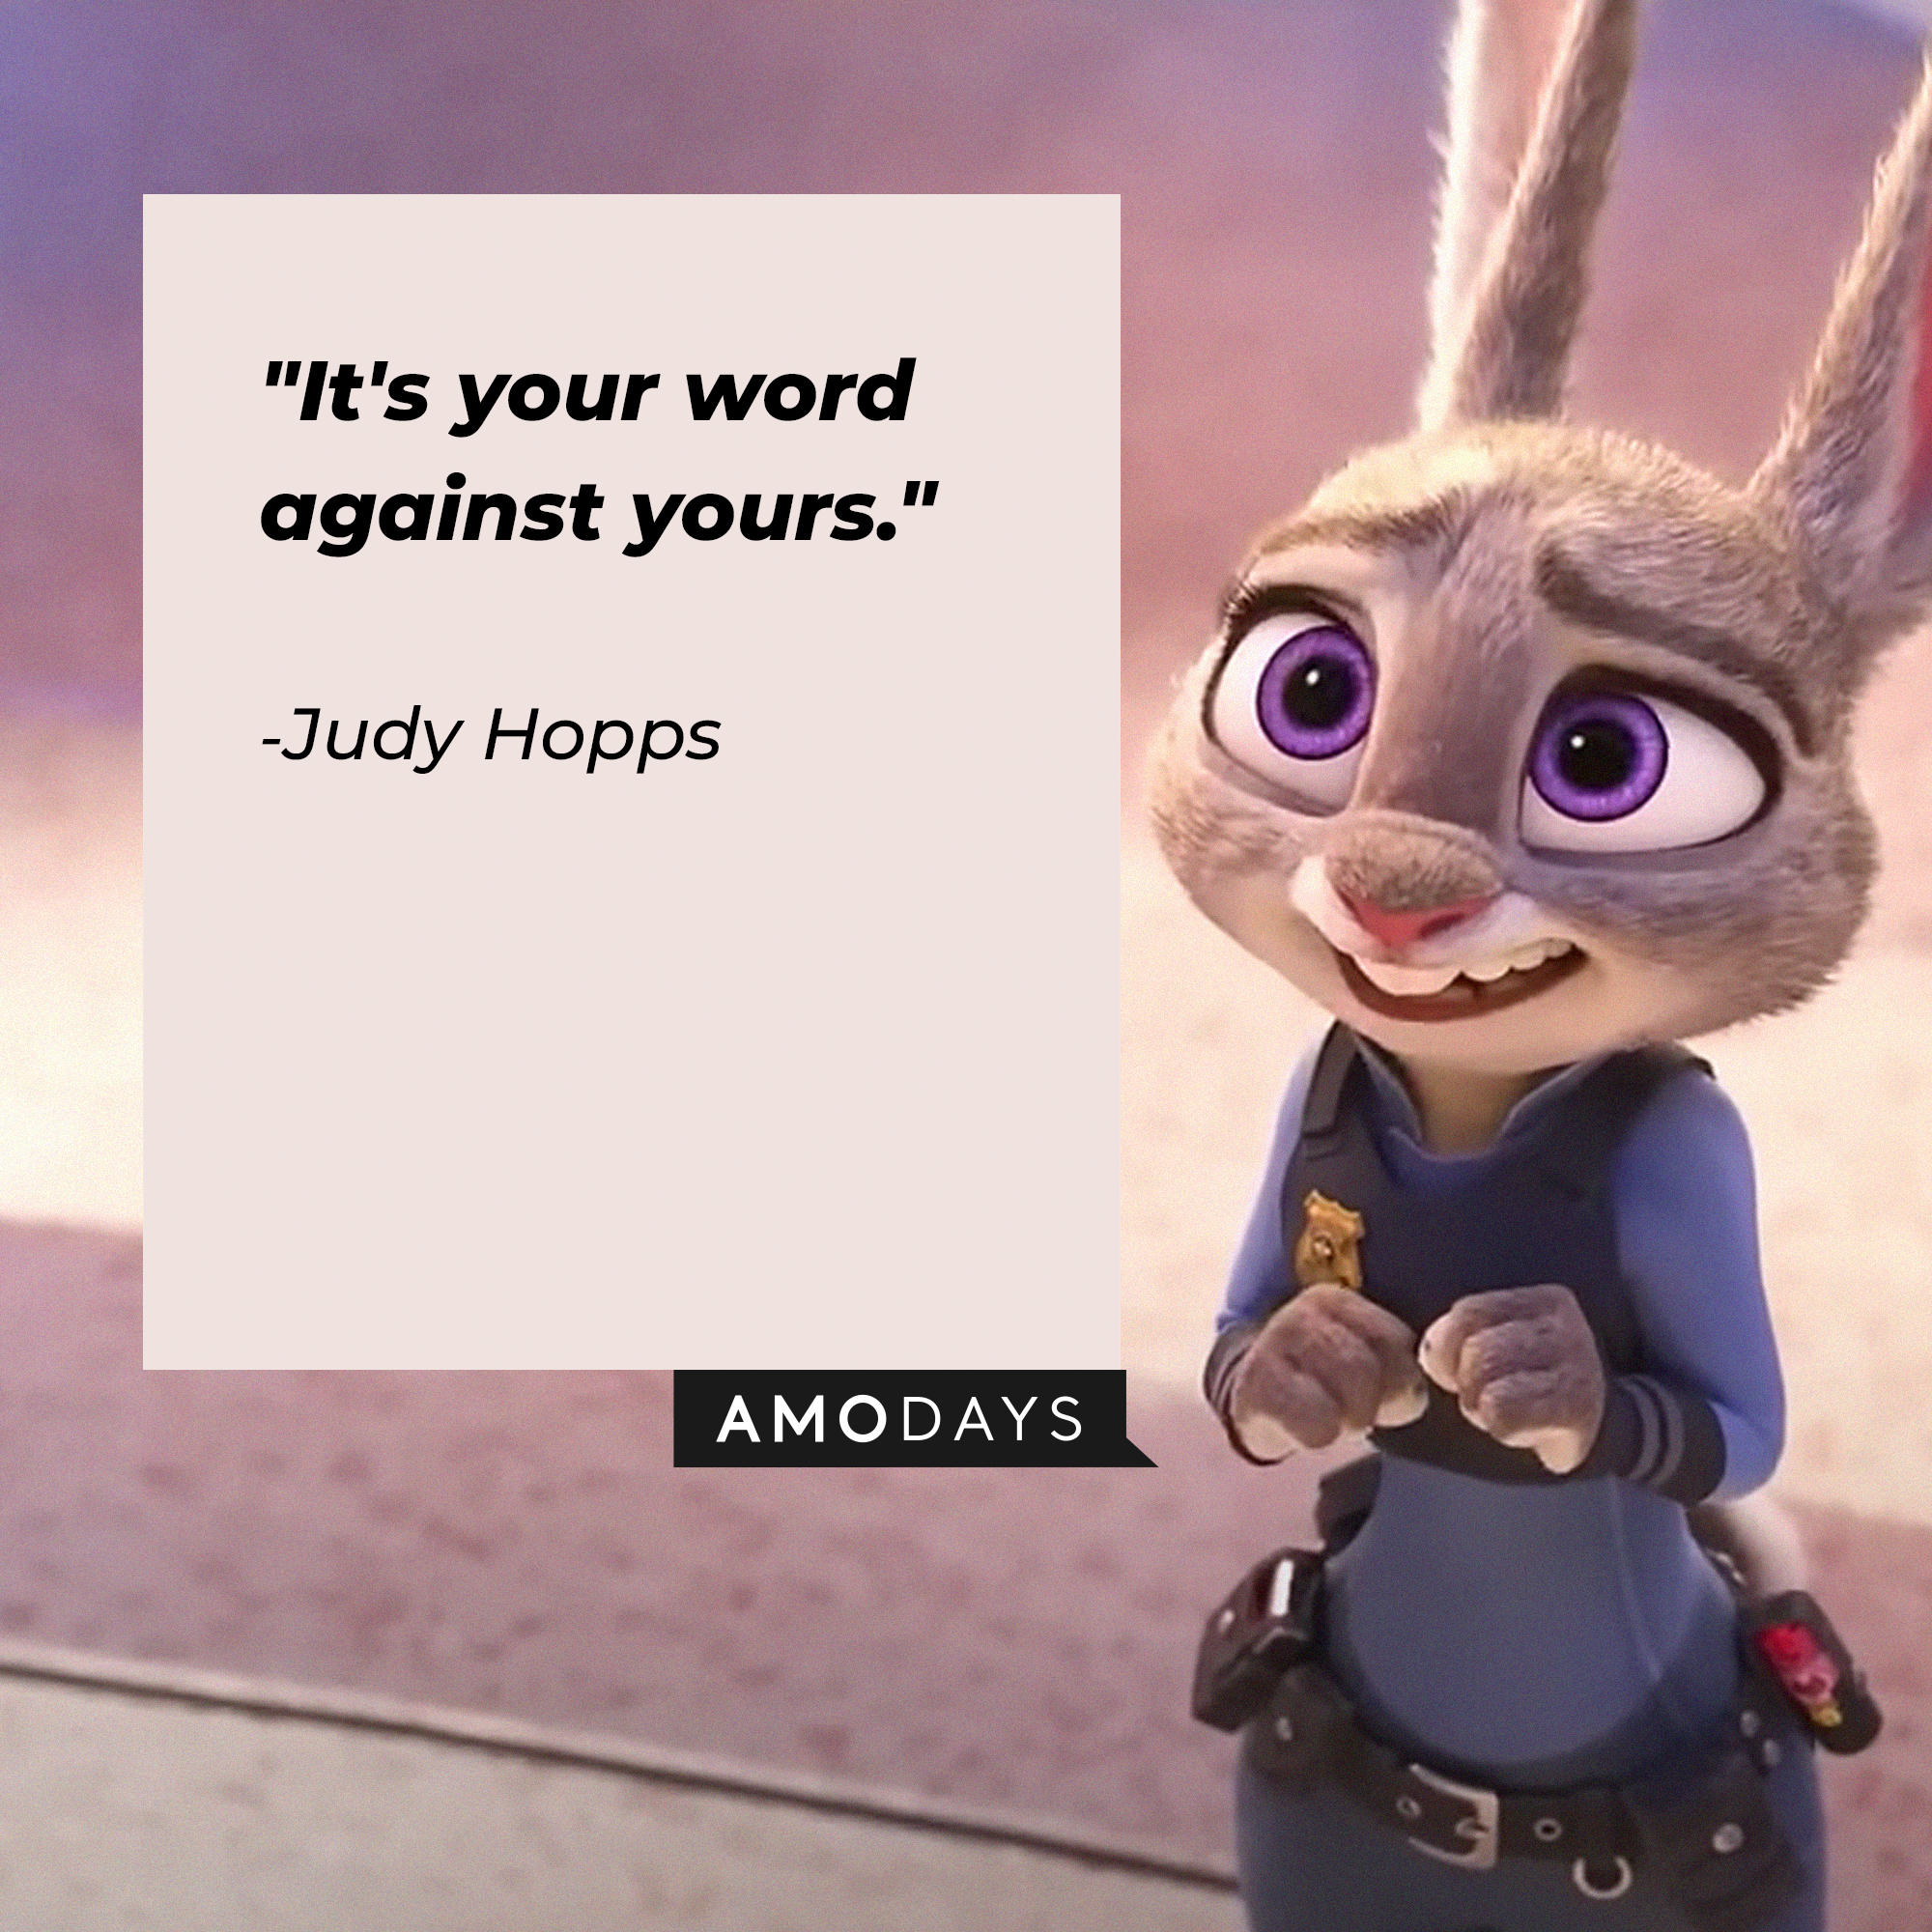 Jody Hopps' quote: "It's your word against yours." | Source: facebook.com/DisneyZootopia